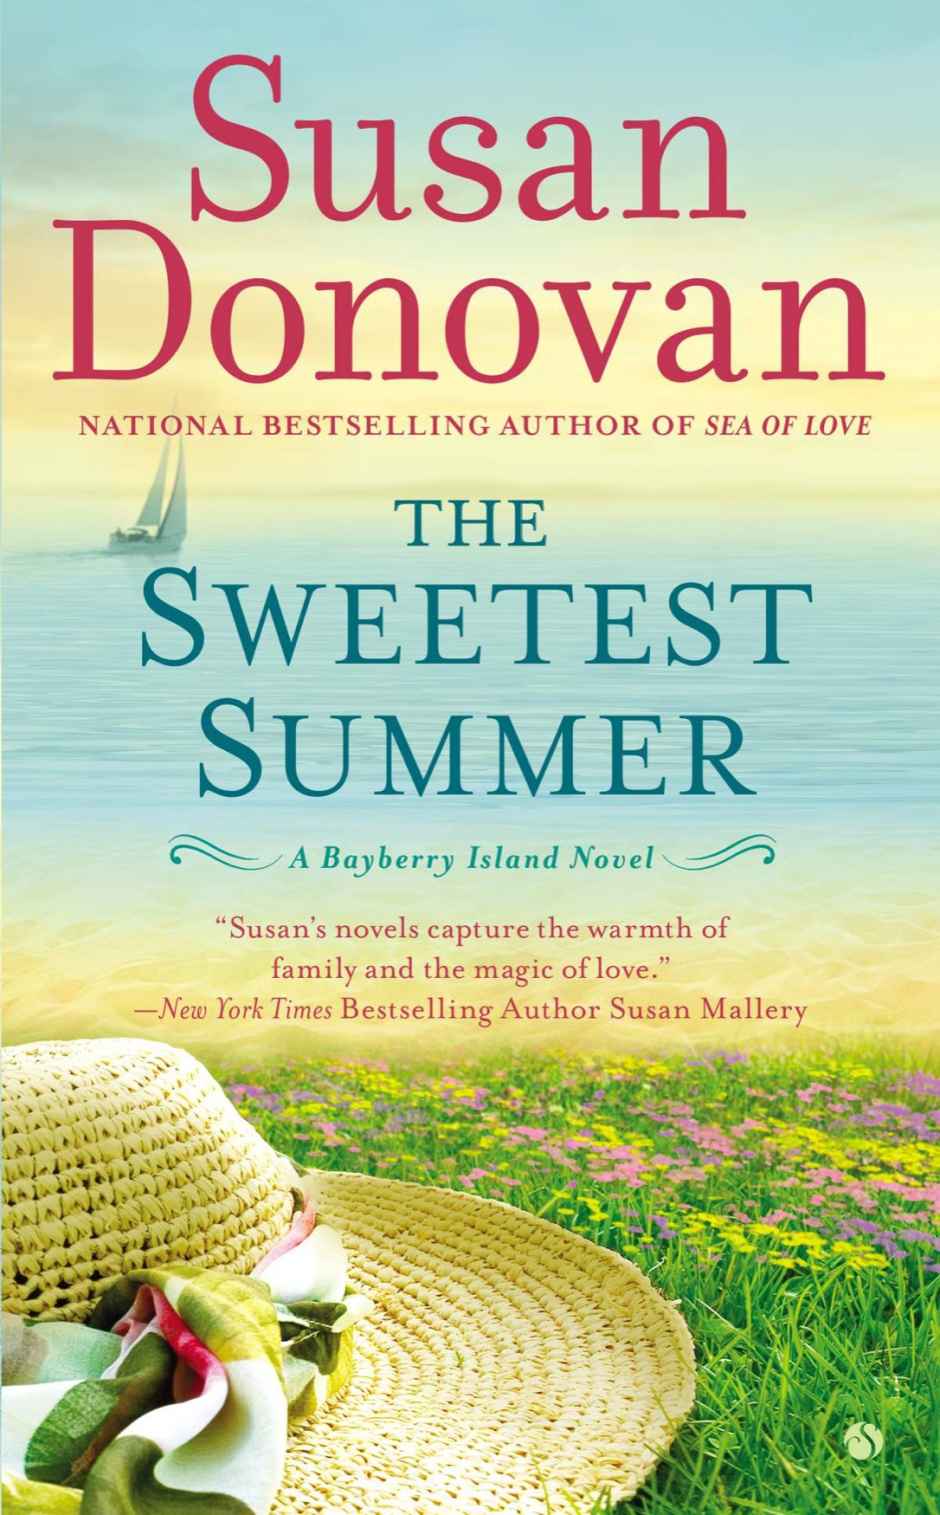 The Sweetest Summer: A Bayberry Island Novel by Susan Donovan